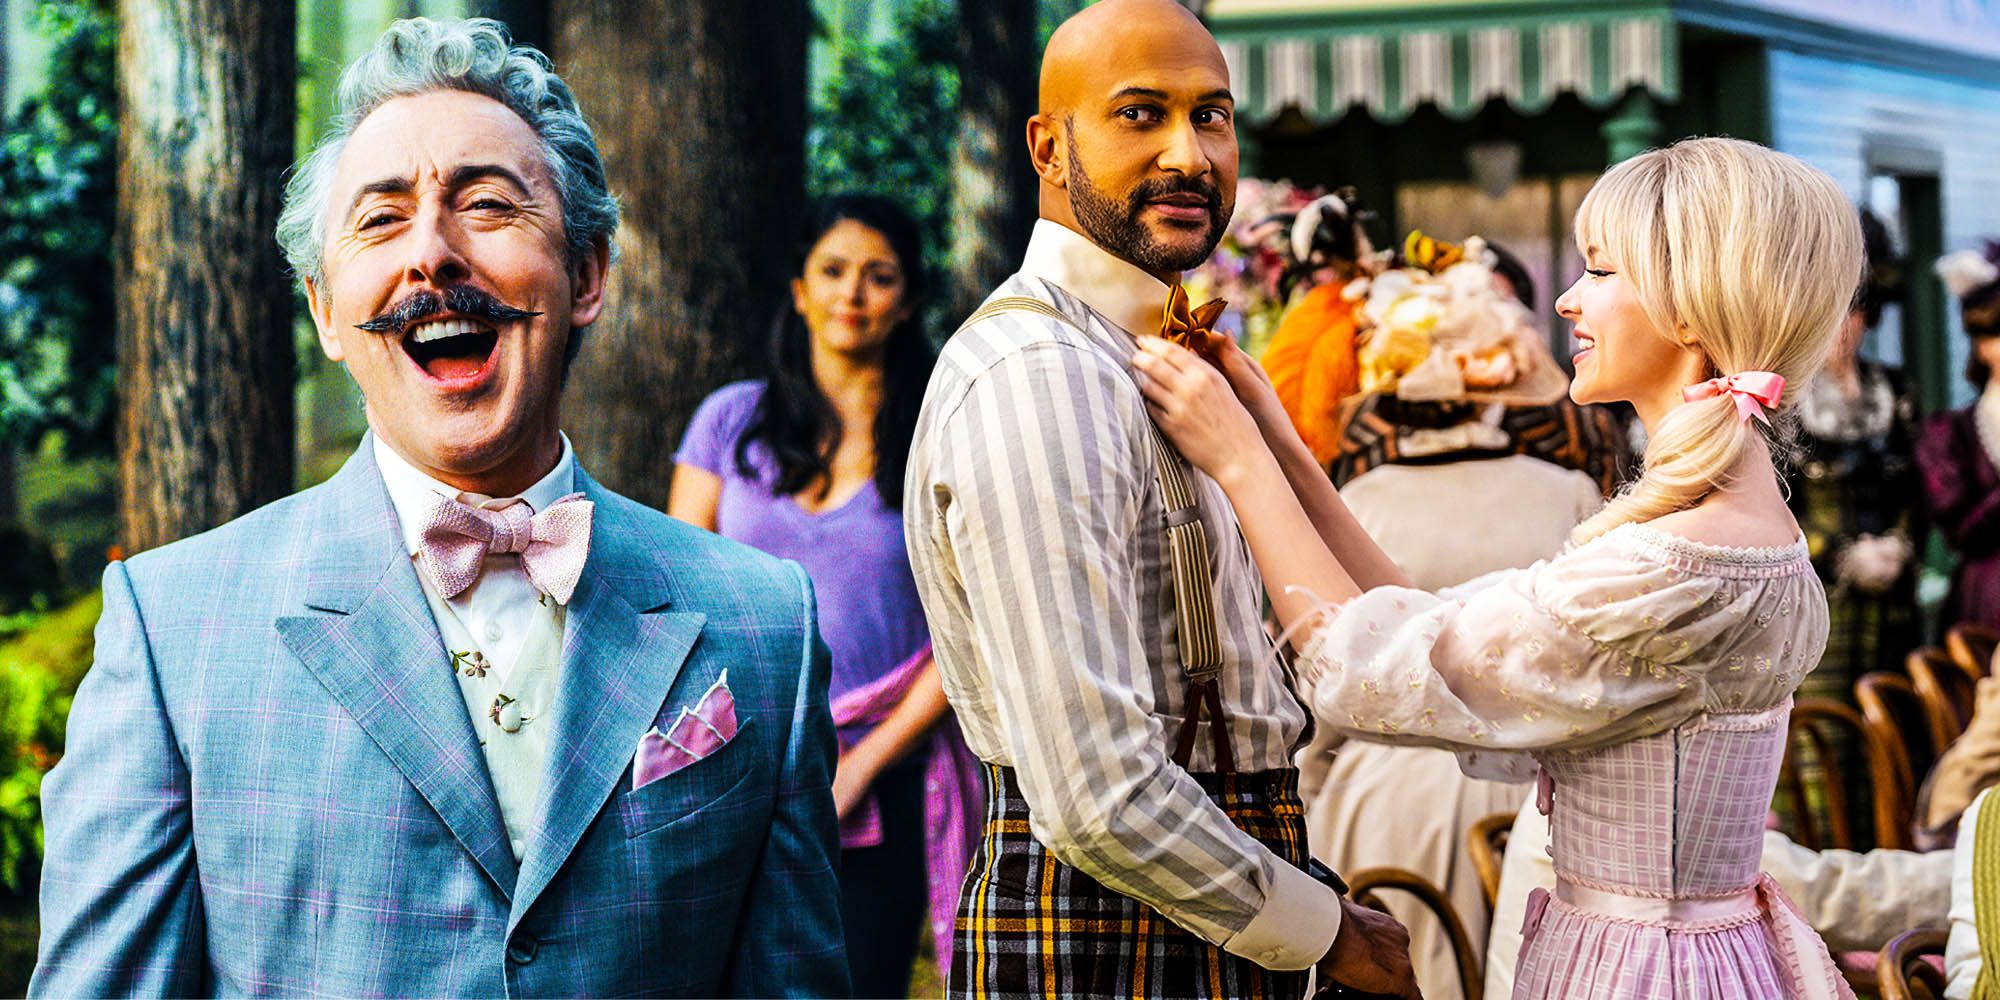 What To Expect From Schmigadoon season 2 keegan michael key